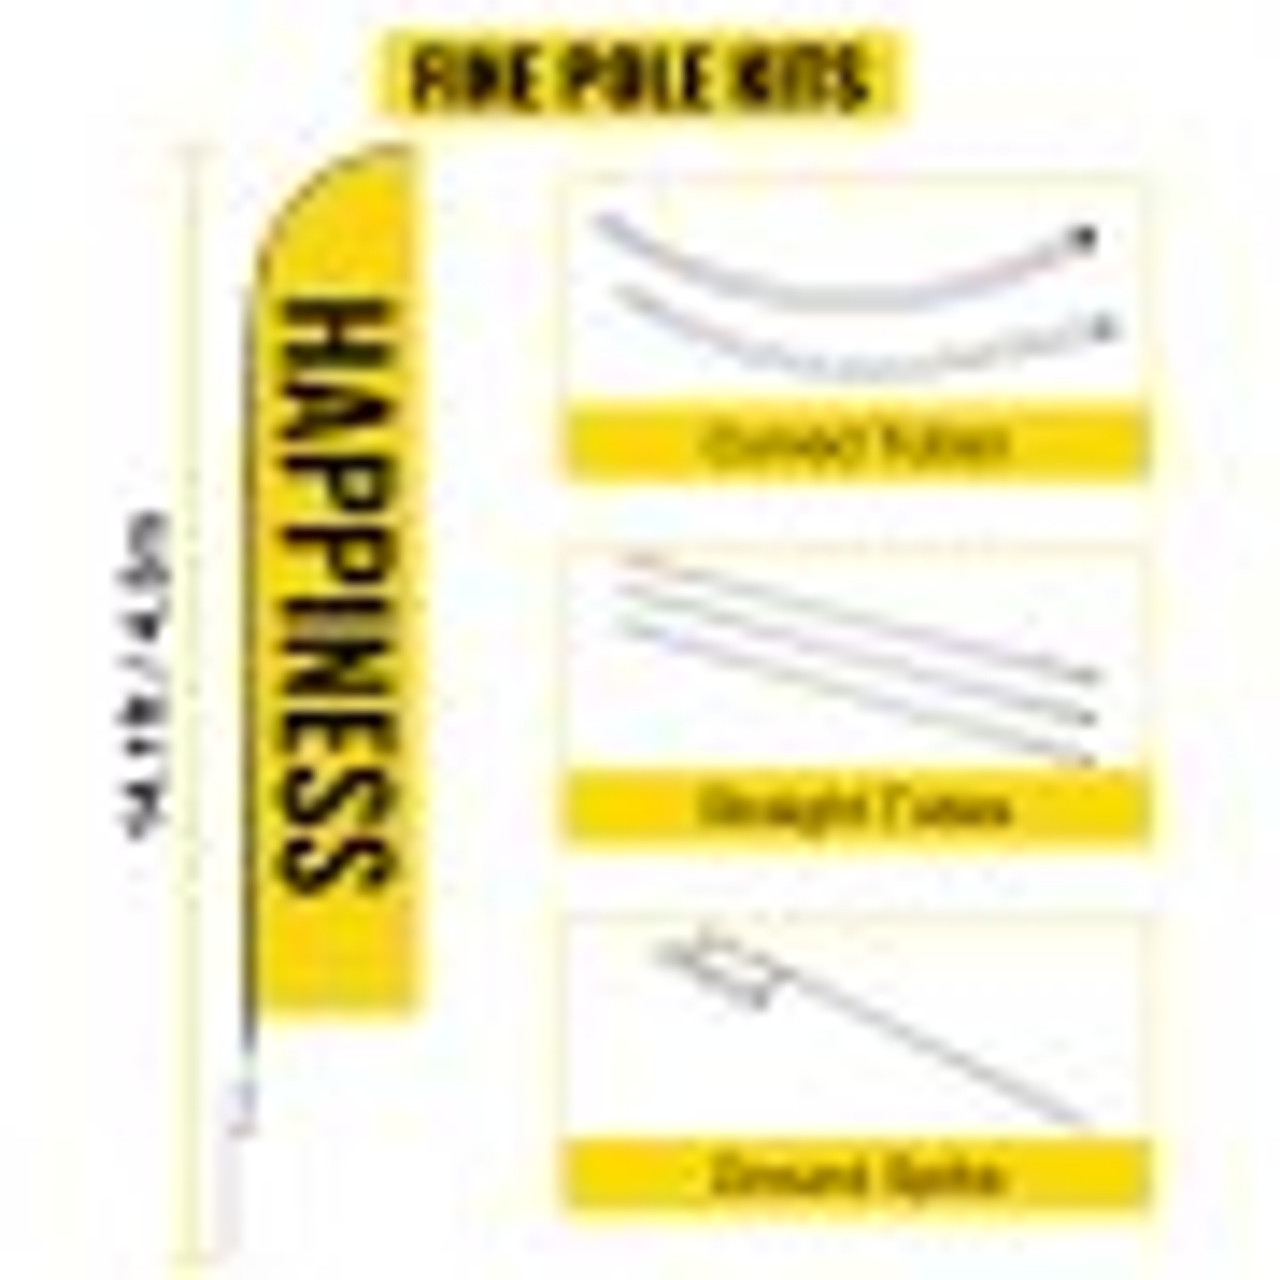 Advertising Flag Pole, 2 x Feather Flag Bundles with Ground Spike, 16 ft Windless Flag Pole Sets with Ground Mounting Stake, 6pcs Swooper Flag Pole Kit, Sign Flag for Businesses Storefronts